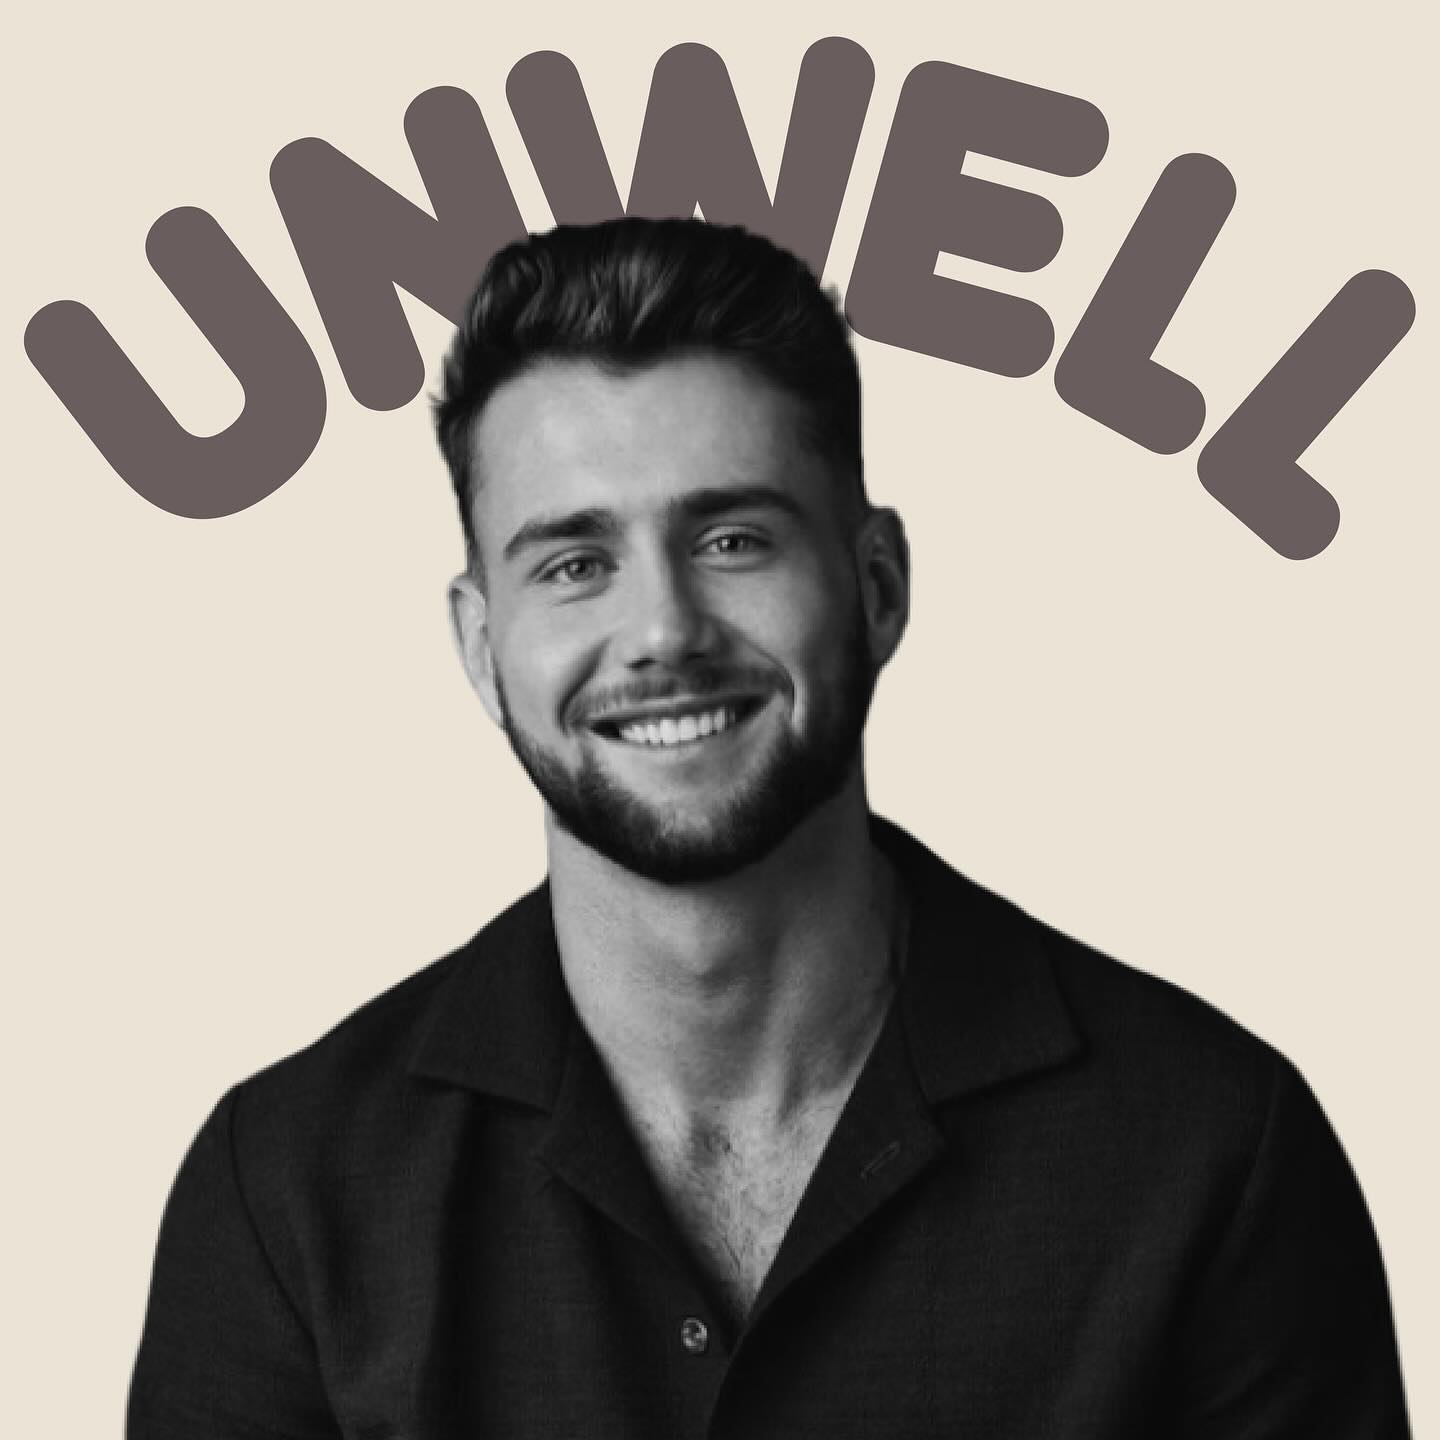 A picture of Harry Jowsey with The Unwell Network's logo behind